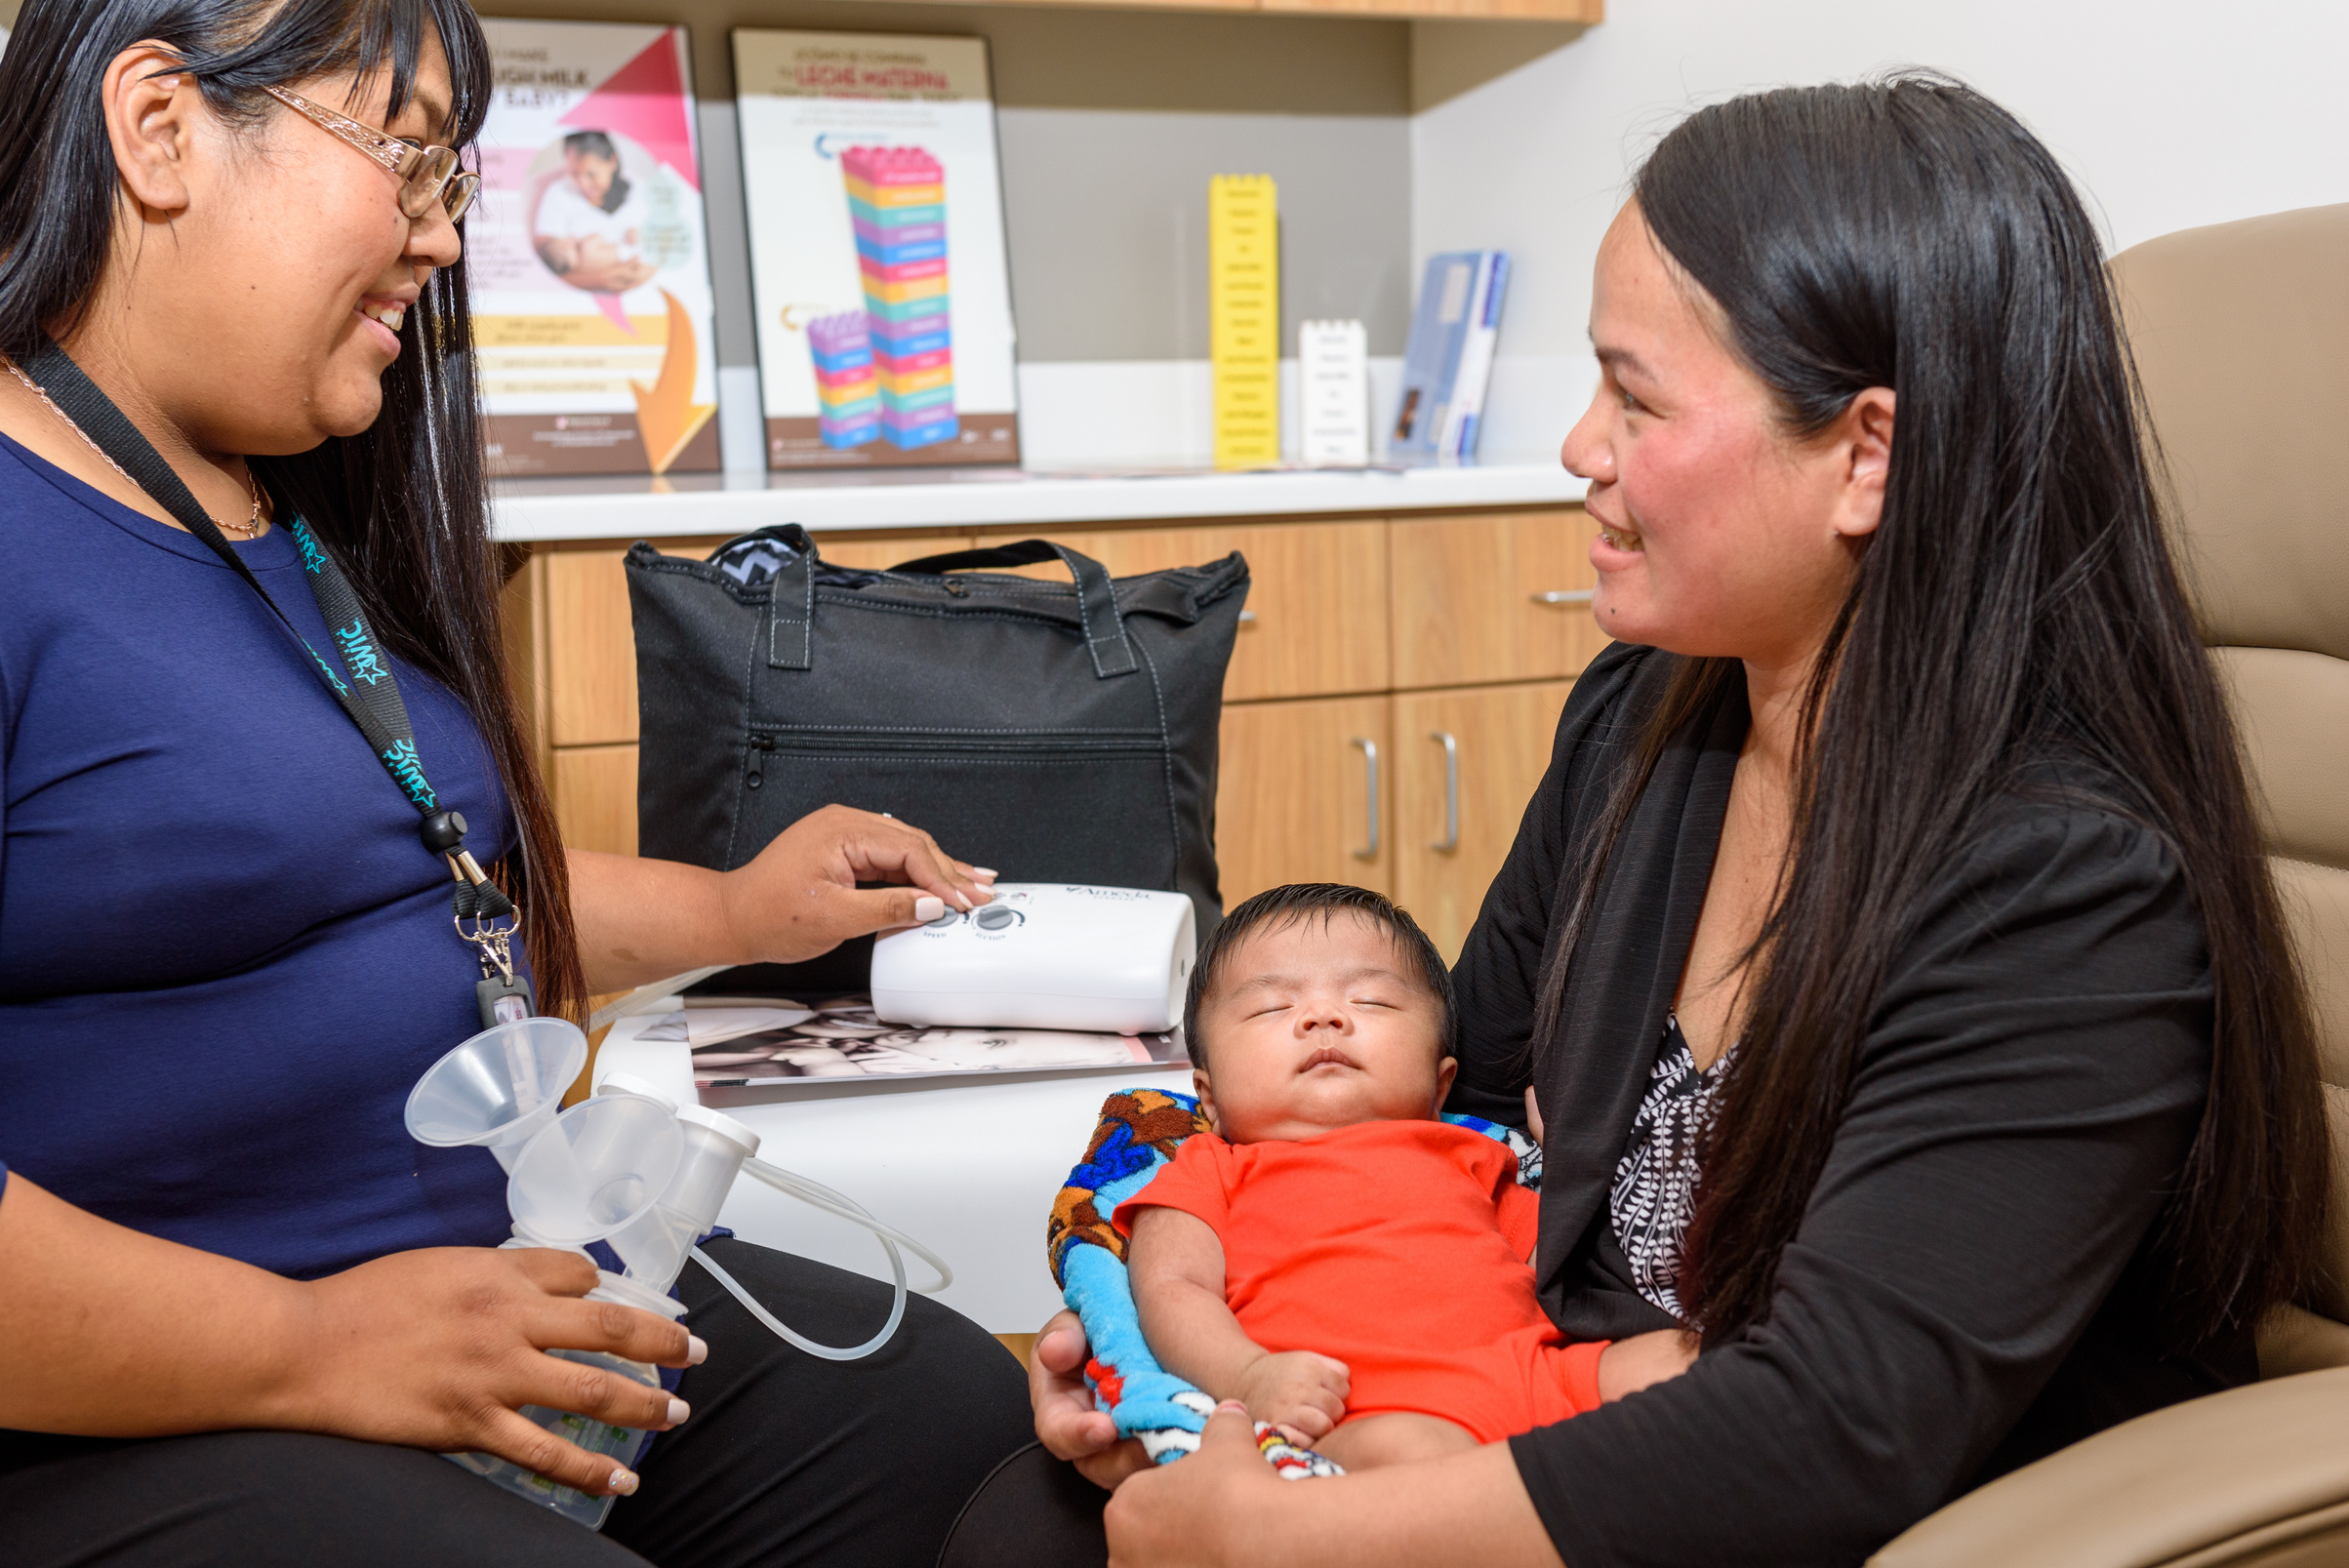 A WIC educator showing a breastfeeding pump to a client with an infant.